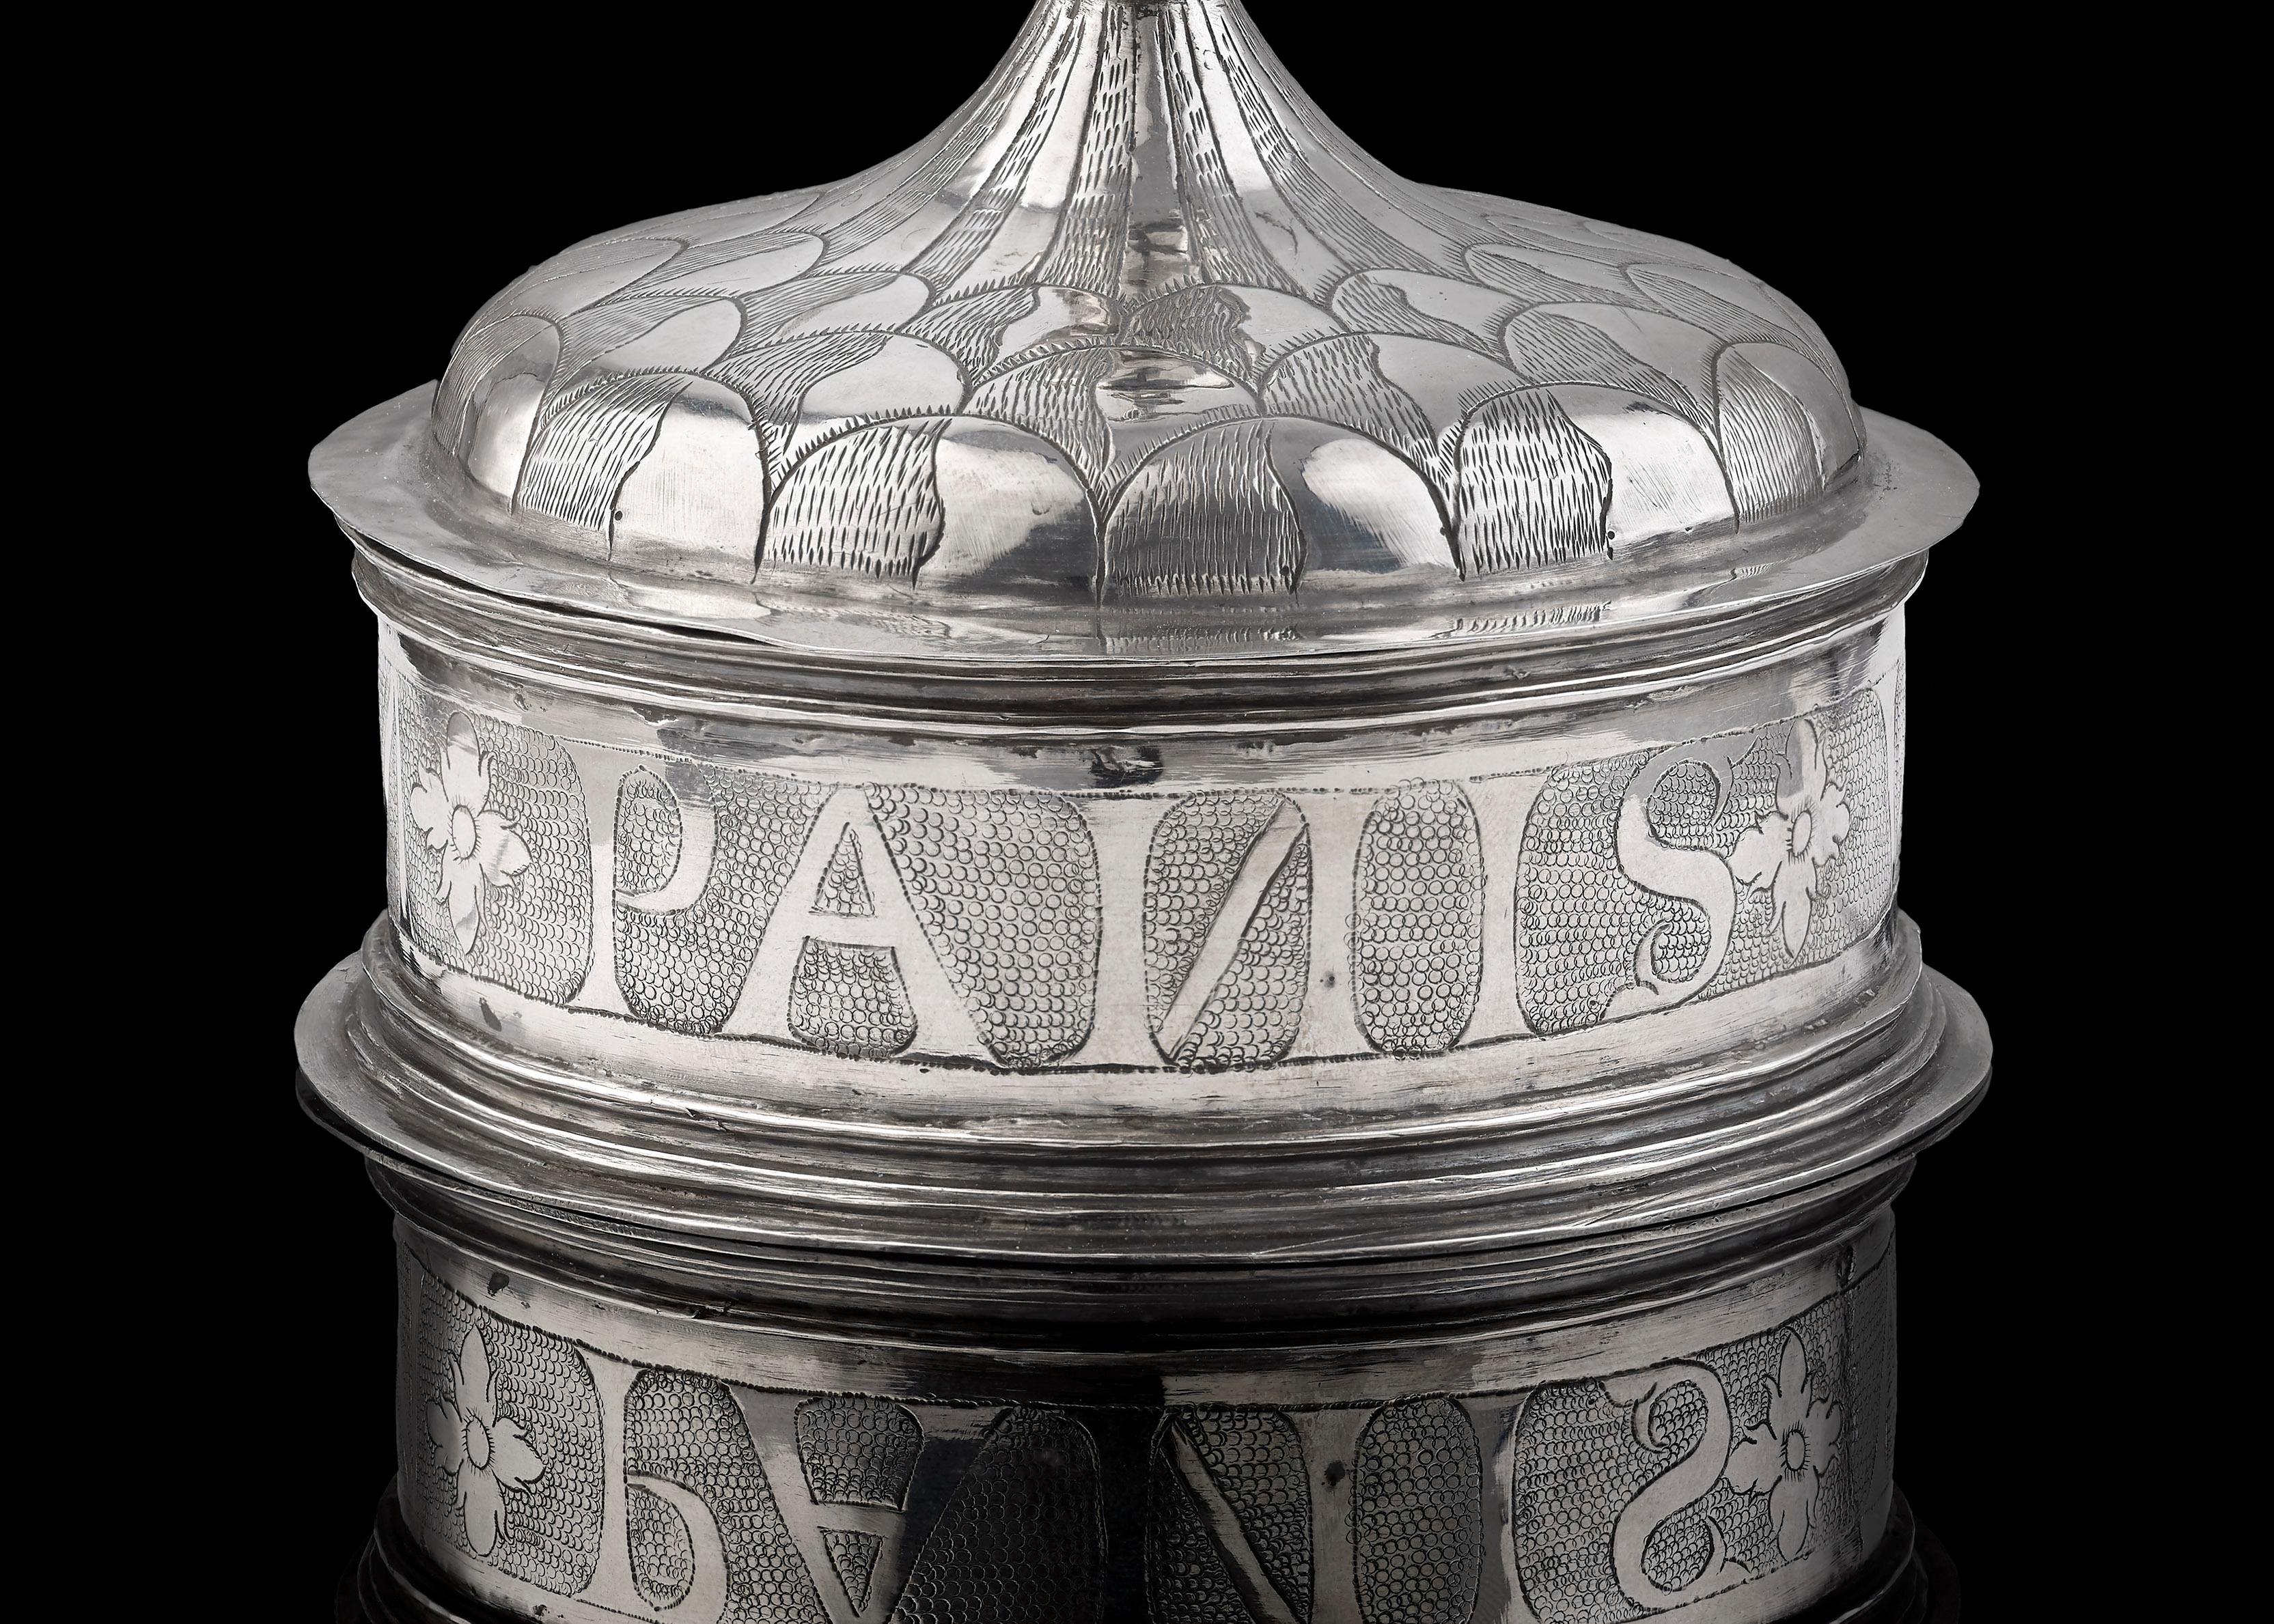 A Spanish silver Pyx, circa 1600, gilded inside and with maker's mark; engraved around the body with the words 'Ego Sum Panis Vie' (I am the bread of life); approx. 14 cms tall, and 9.8 cms in diameter across the base; weight is 5 1/2 ozs